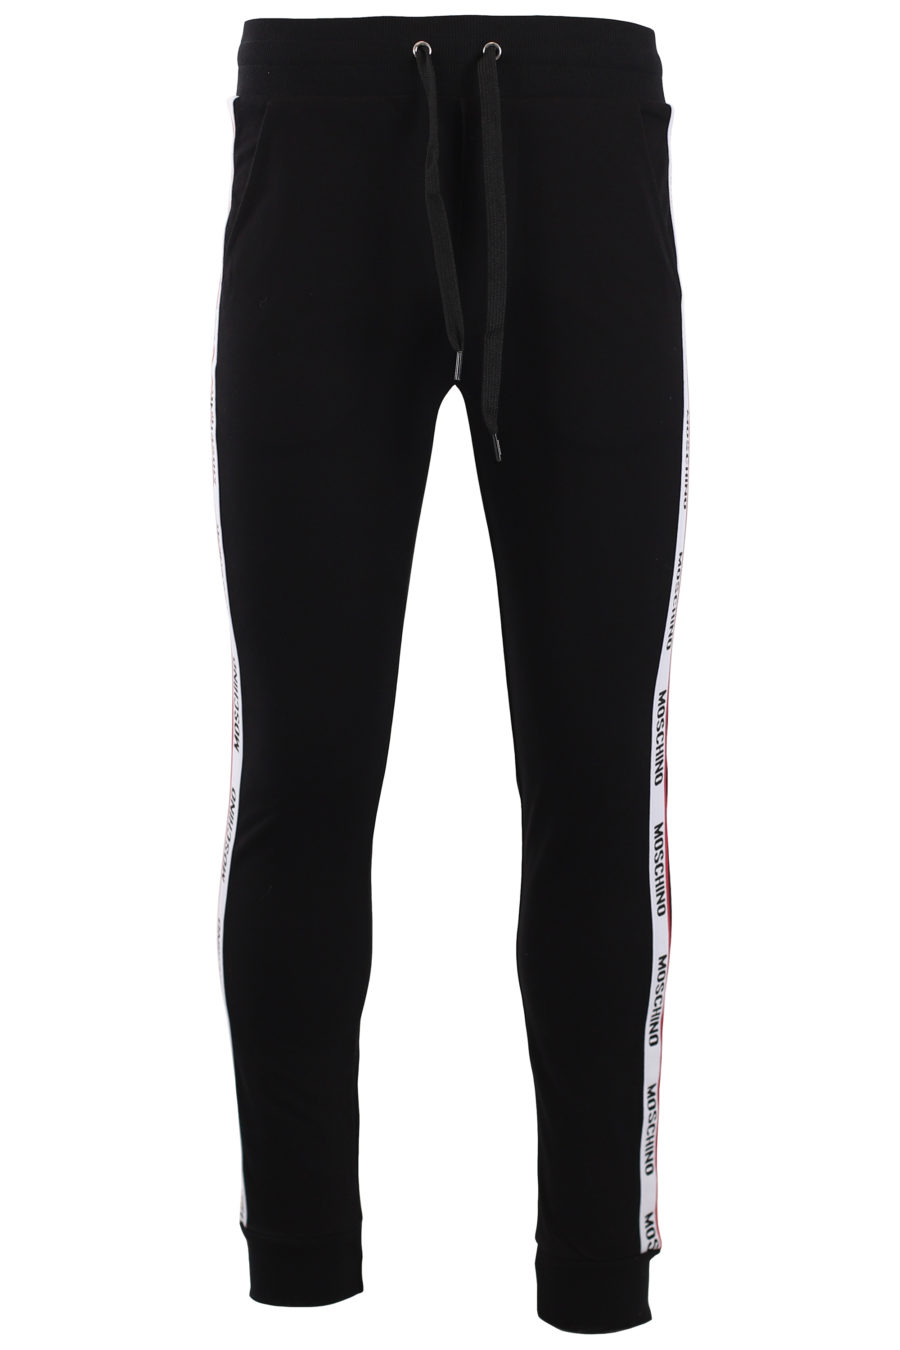 Tracksuit bottoms black with logo on the sides - IMG 9577